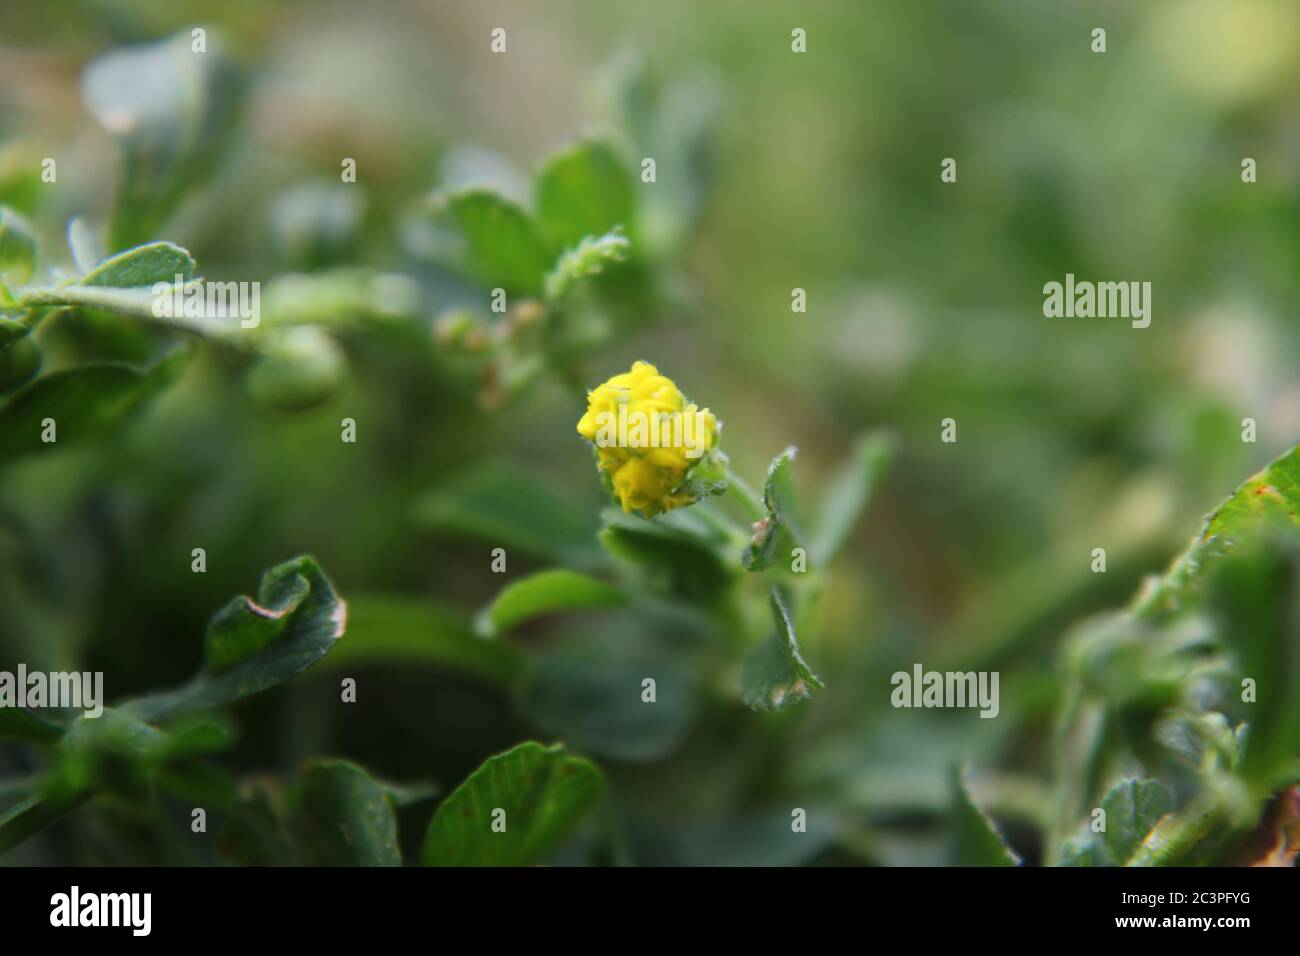 Tiny yellow invasive black medick, nonesuch, or hop clover flower growing in the backyard. Stock Photo